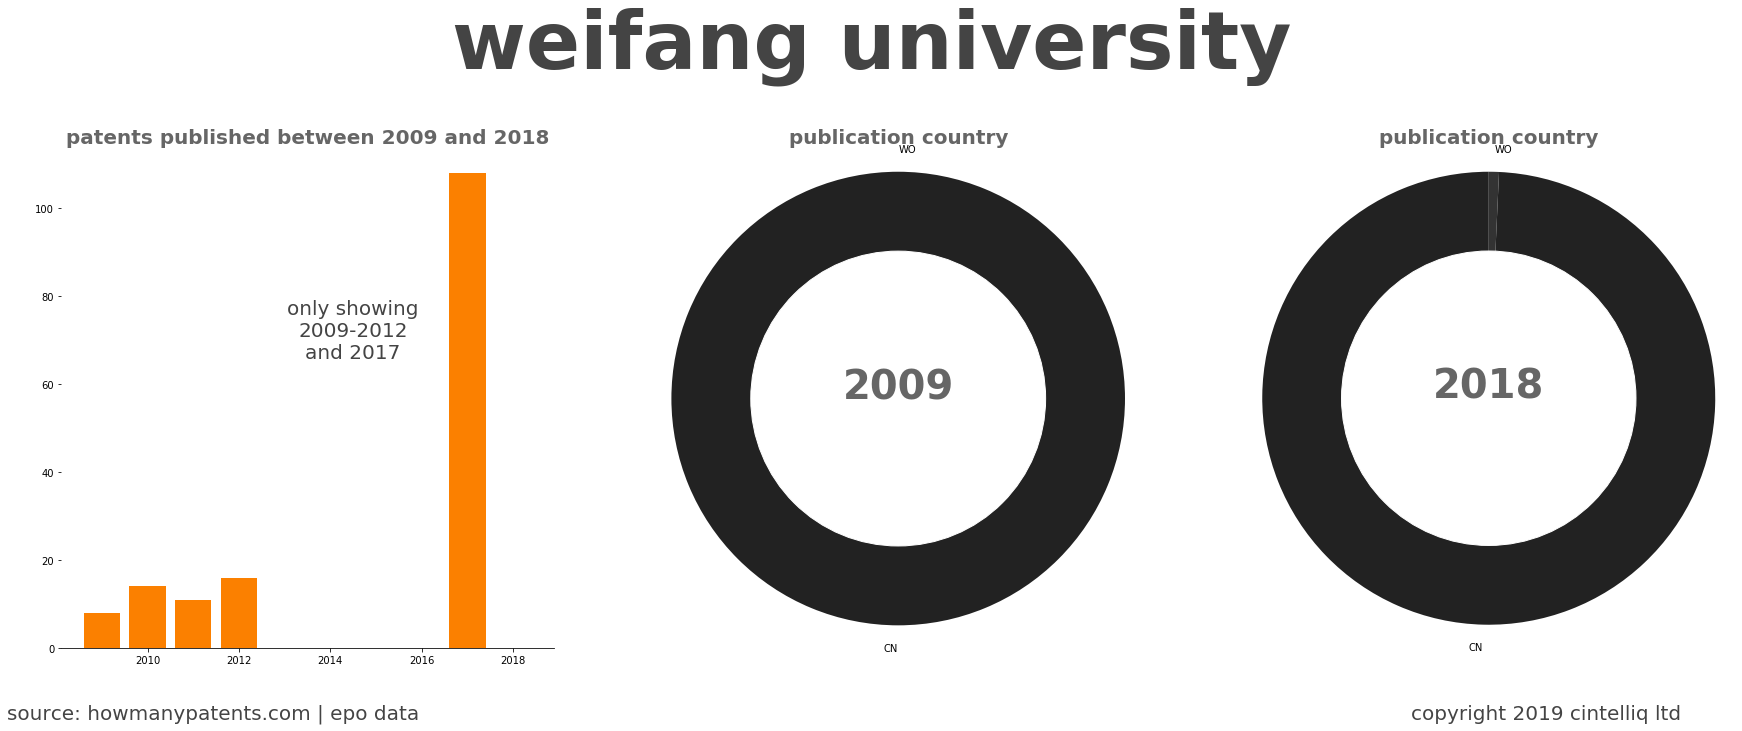 summary of patents for Weifang University